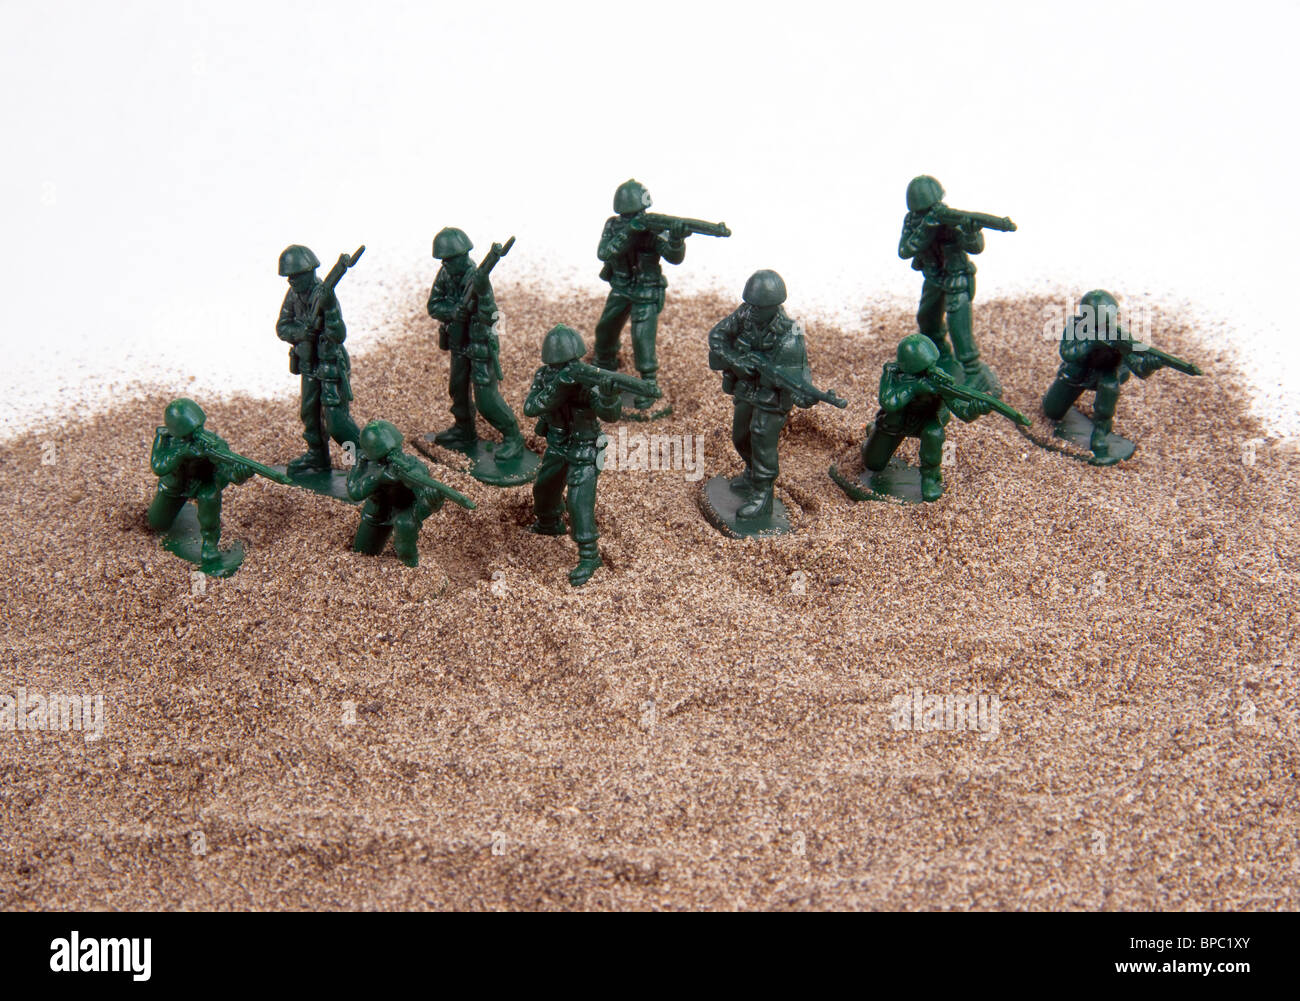 GREEN ARMY MEN UNIVERSITY plastic toy soldiers DIPLOMA vintage military figures 